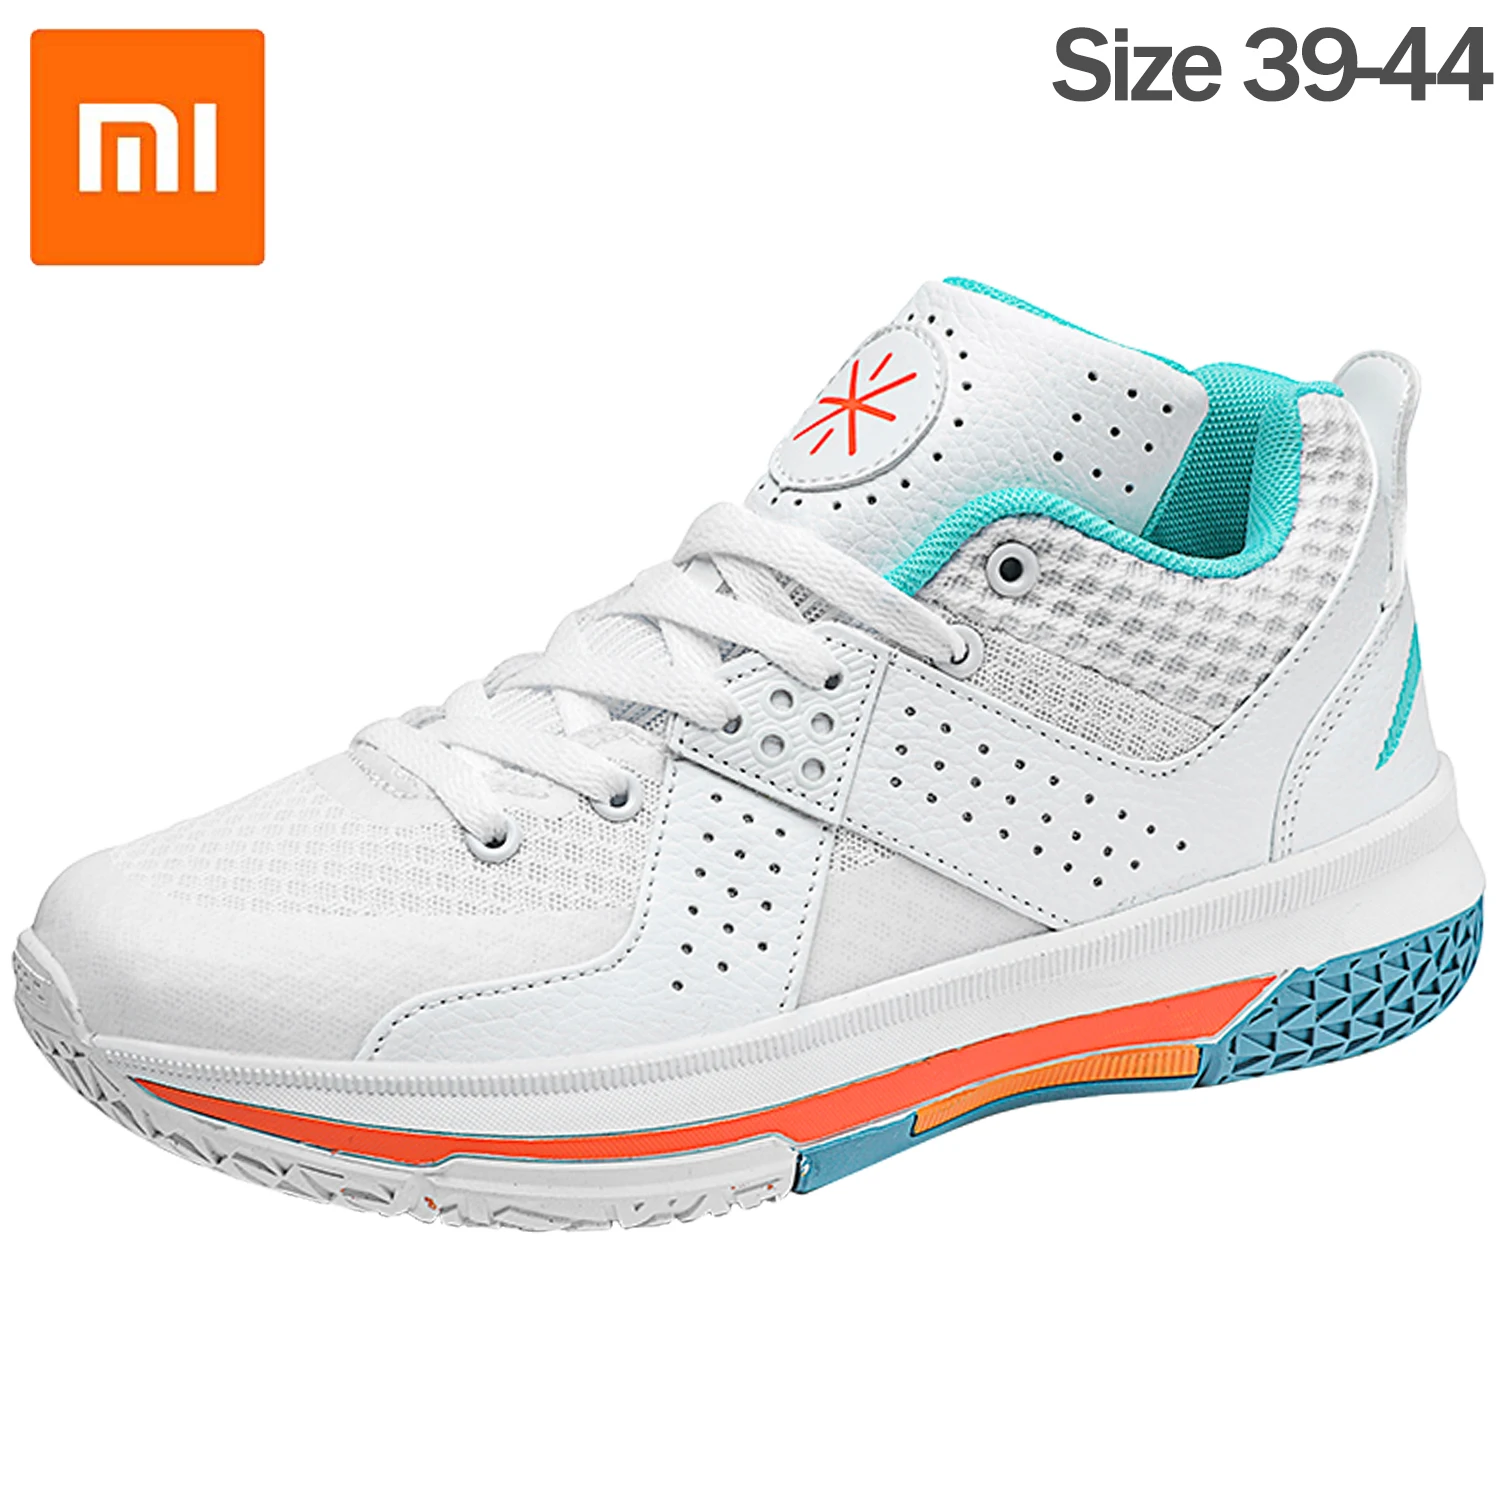 Xiaomi Men Basketball Shoes Breathable Sneakers Professional Anti Slip Sport Shoes for Running Jogging Shoes Athletic Tenni Shoe